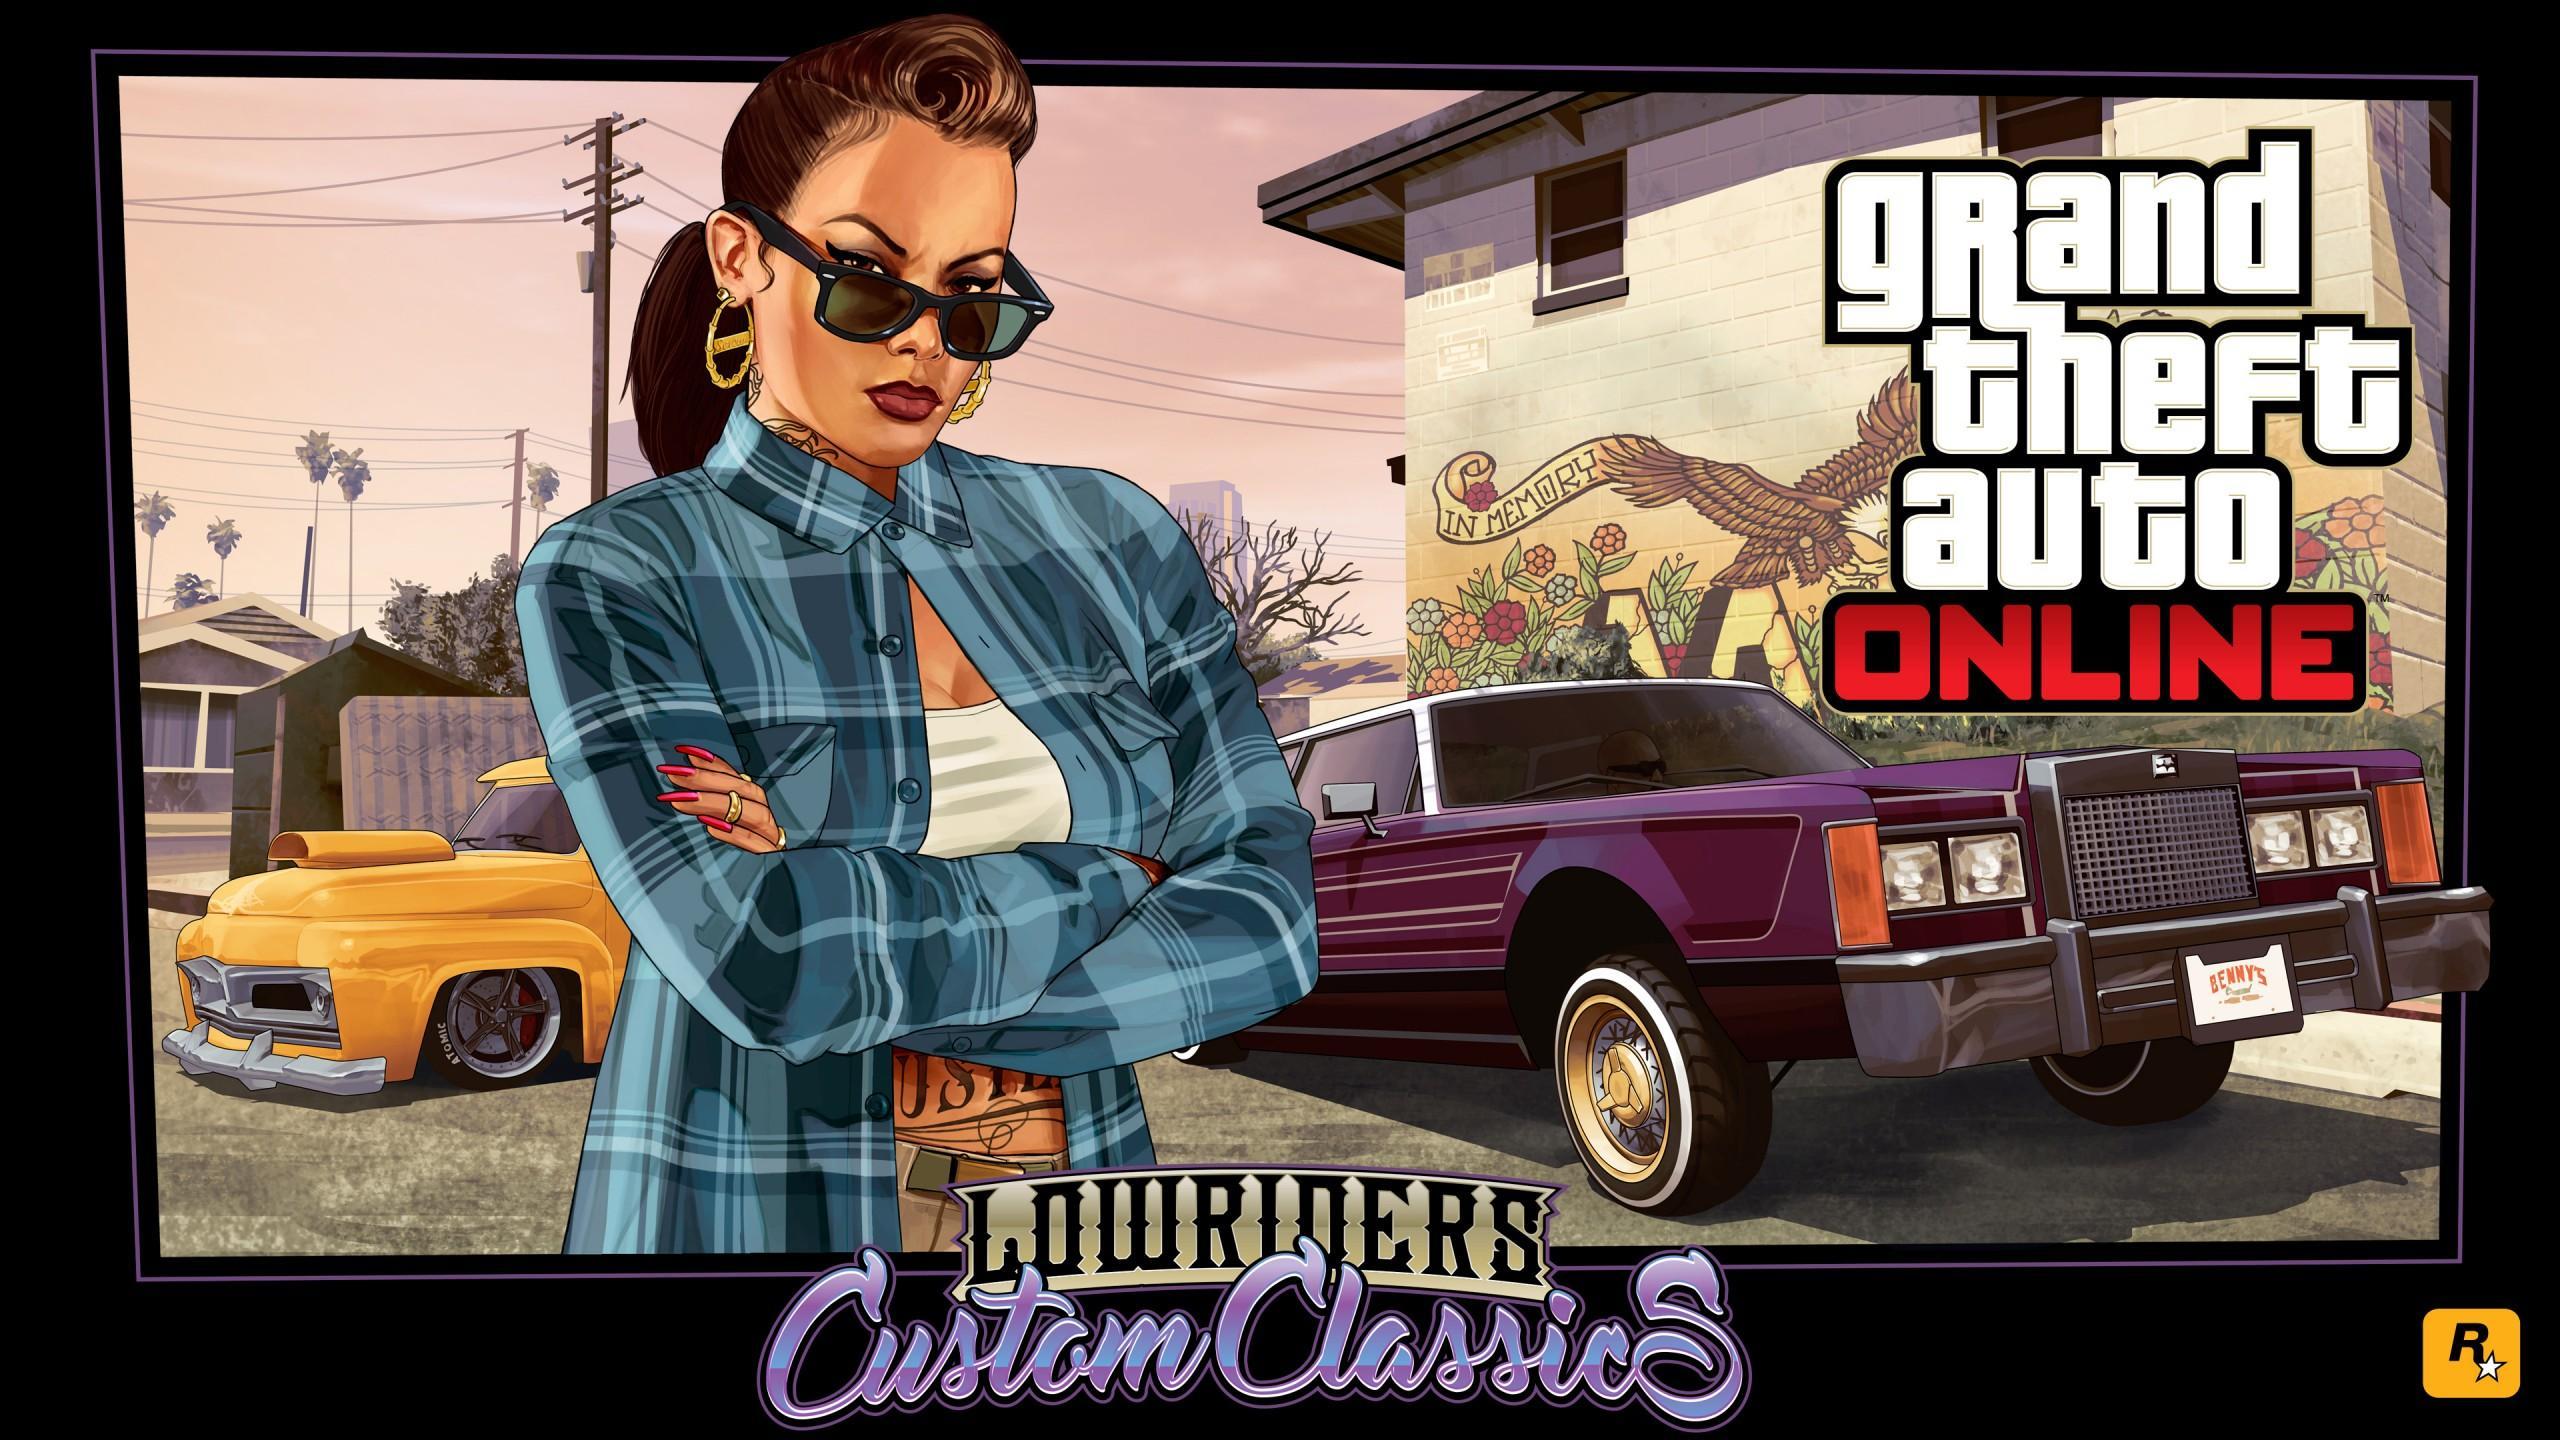 How to Play GTA San Andreas Online? - Null Education